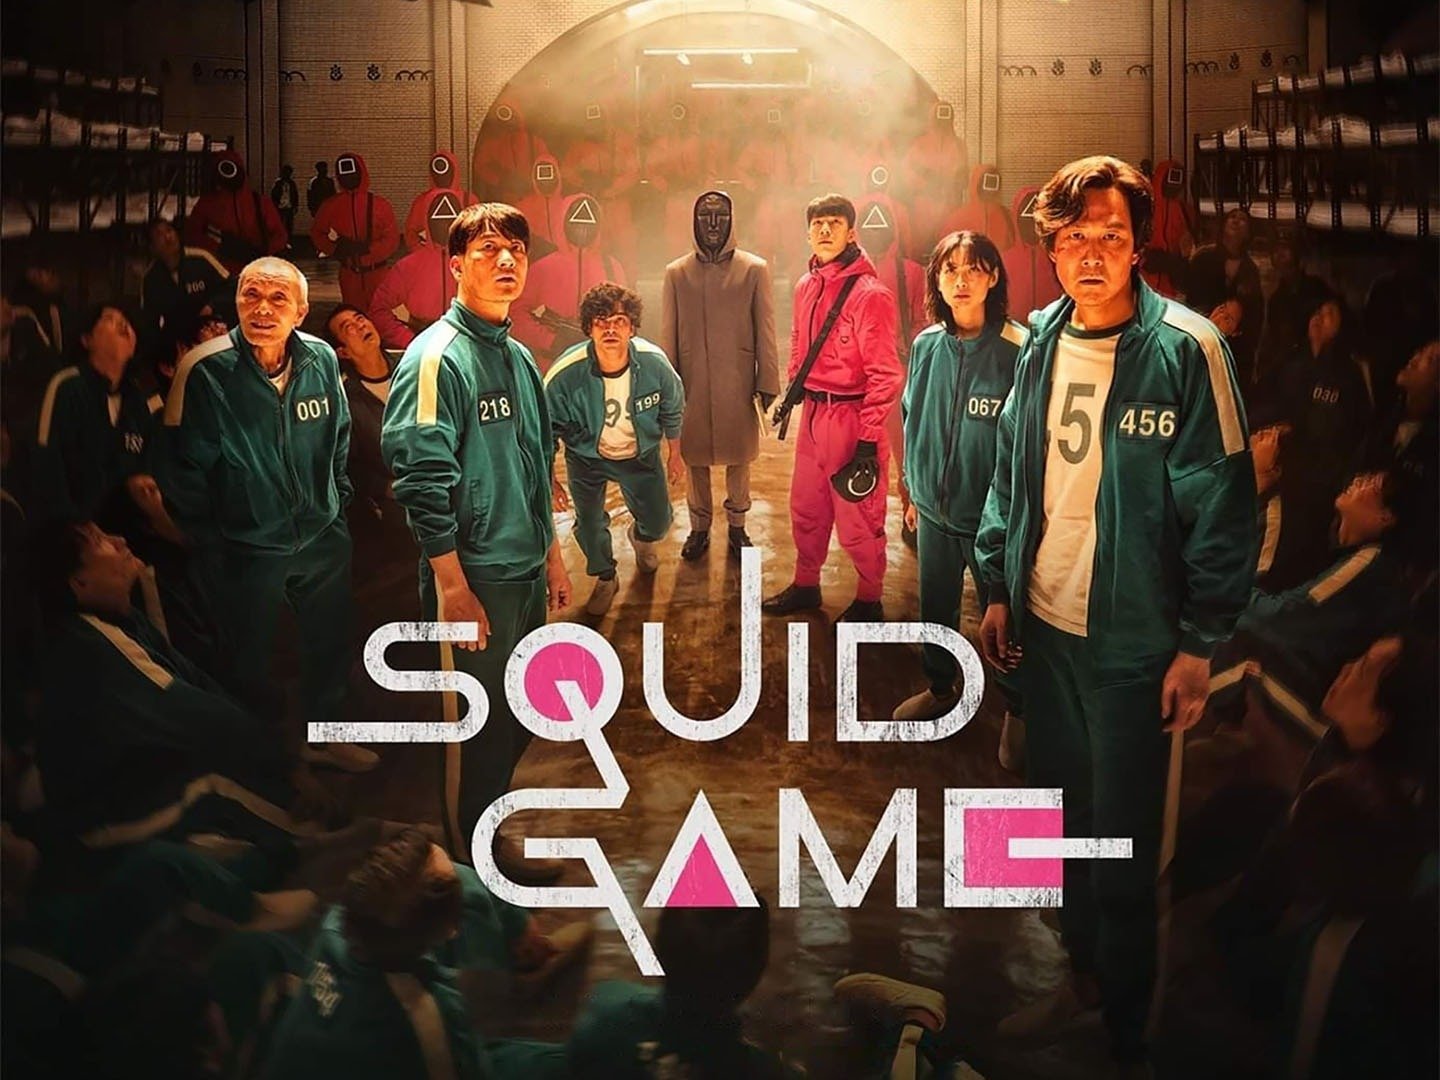 check-this-hilariously-evil-squid-game-billboard-by-netflix-netflix